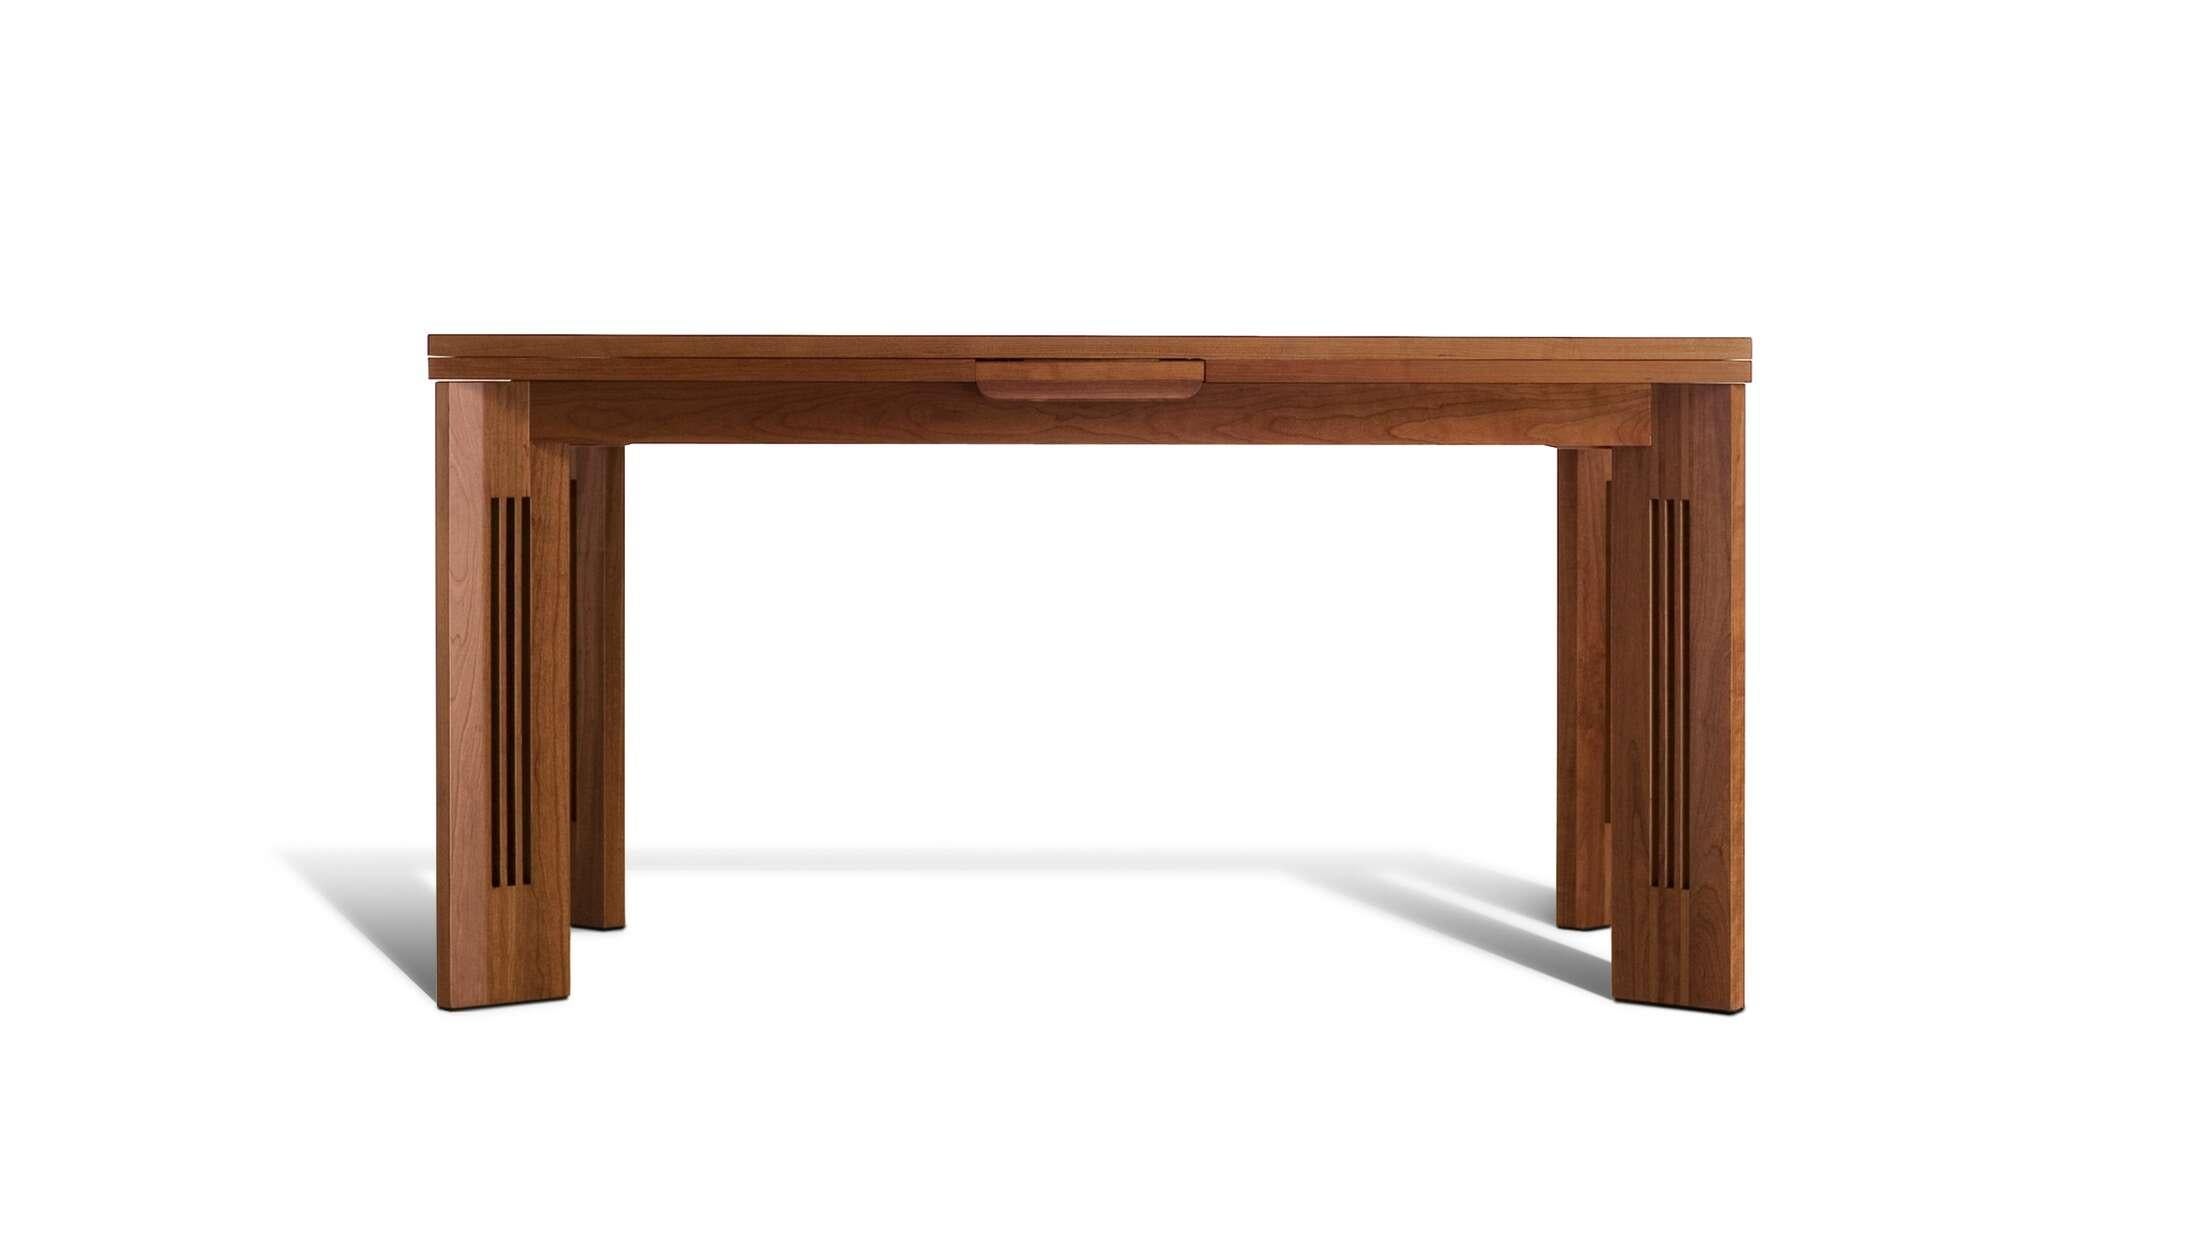 An extendable table (max. width: 265 cm) in cherry, exemplifying the perfect balance between Classic and contemporary, designed by Charles Rennie Mackintosh in 1905. The unique nature of this natural cherrywood table lies in the mechanism under the